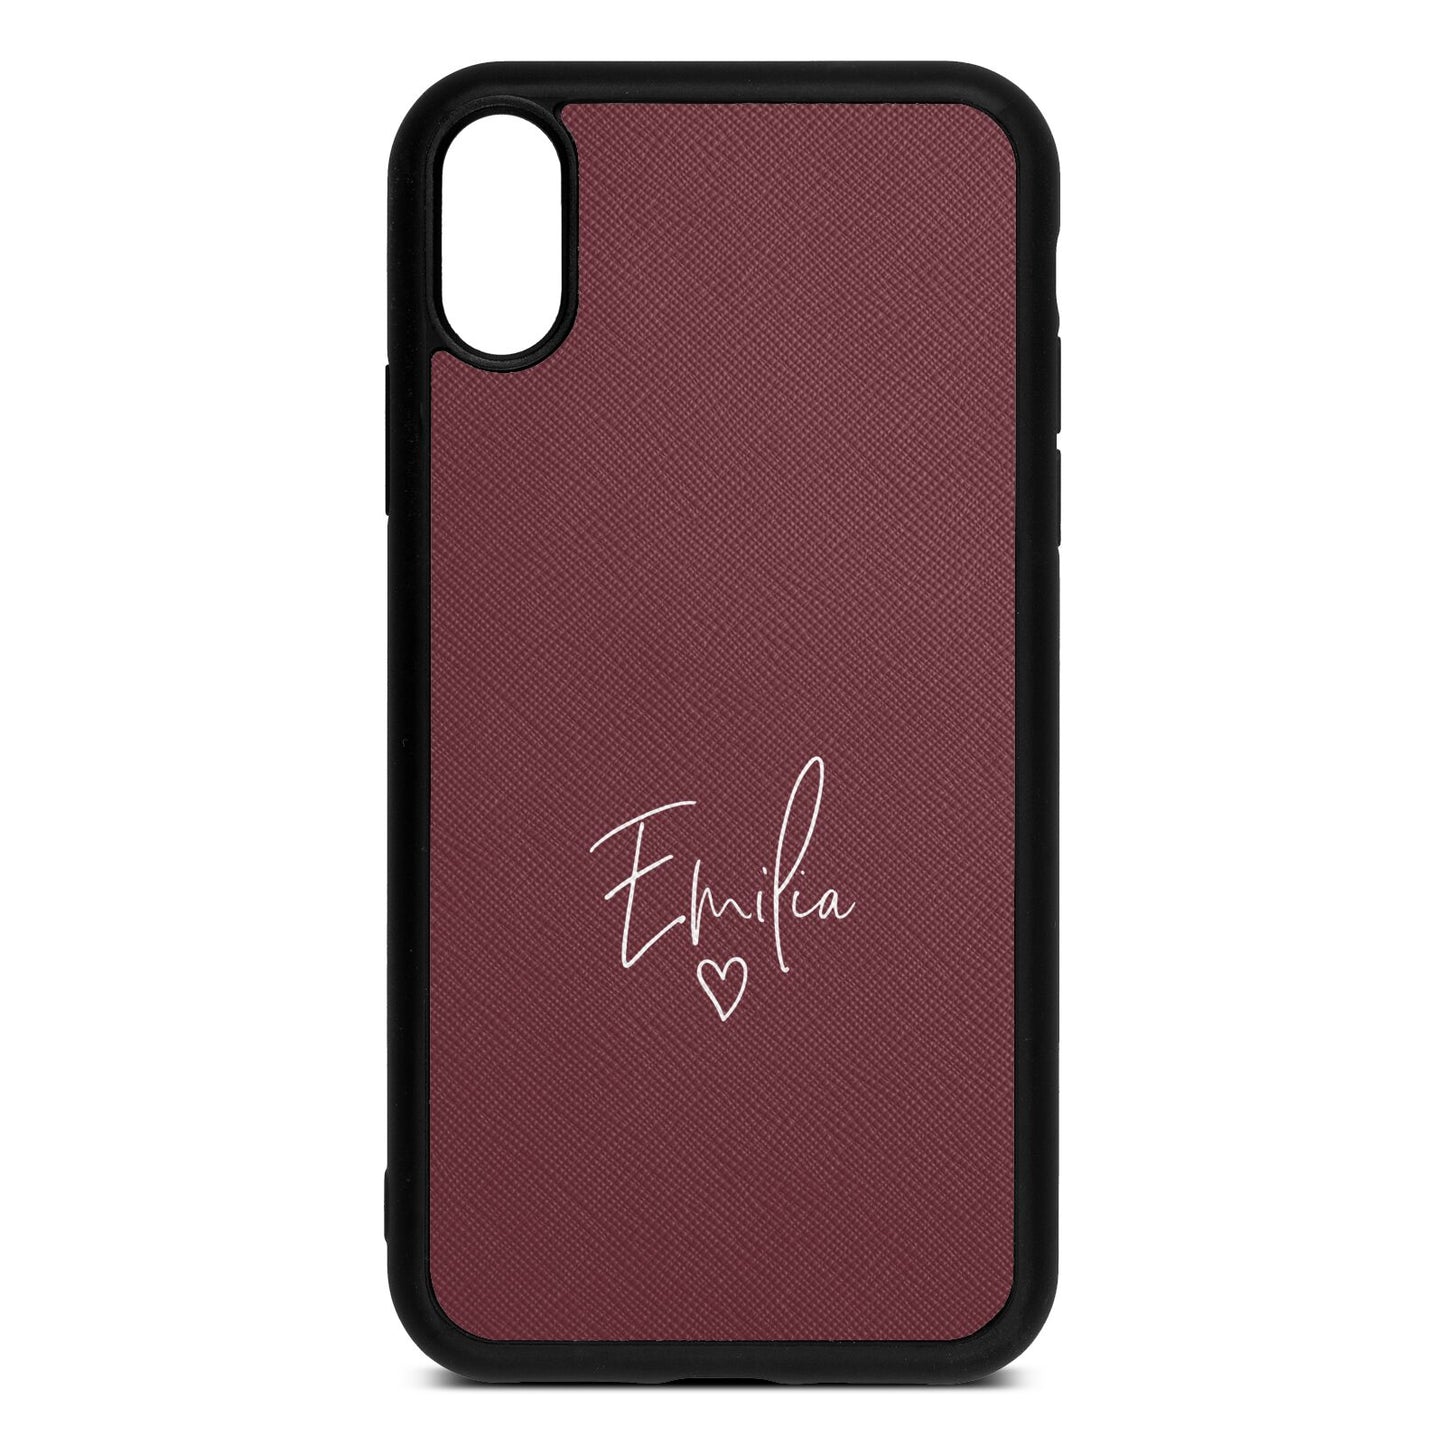 White Handwritten Name Transparent Rose Brown Saffiano Leather iPhone Xr Case